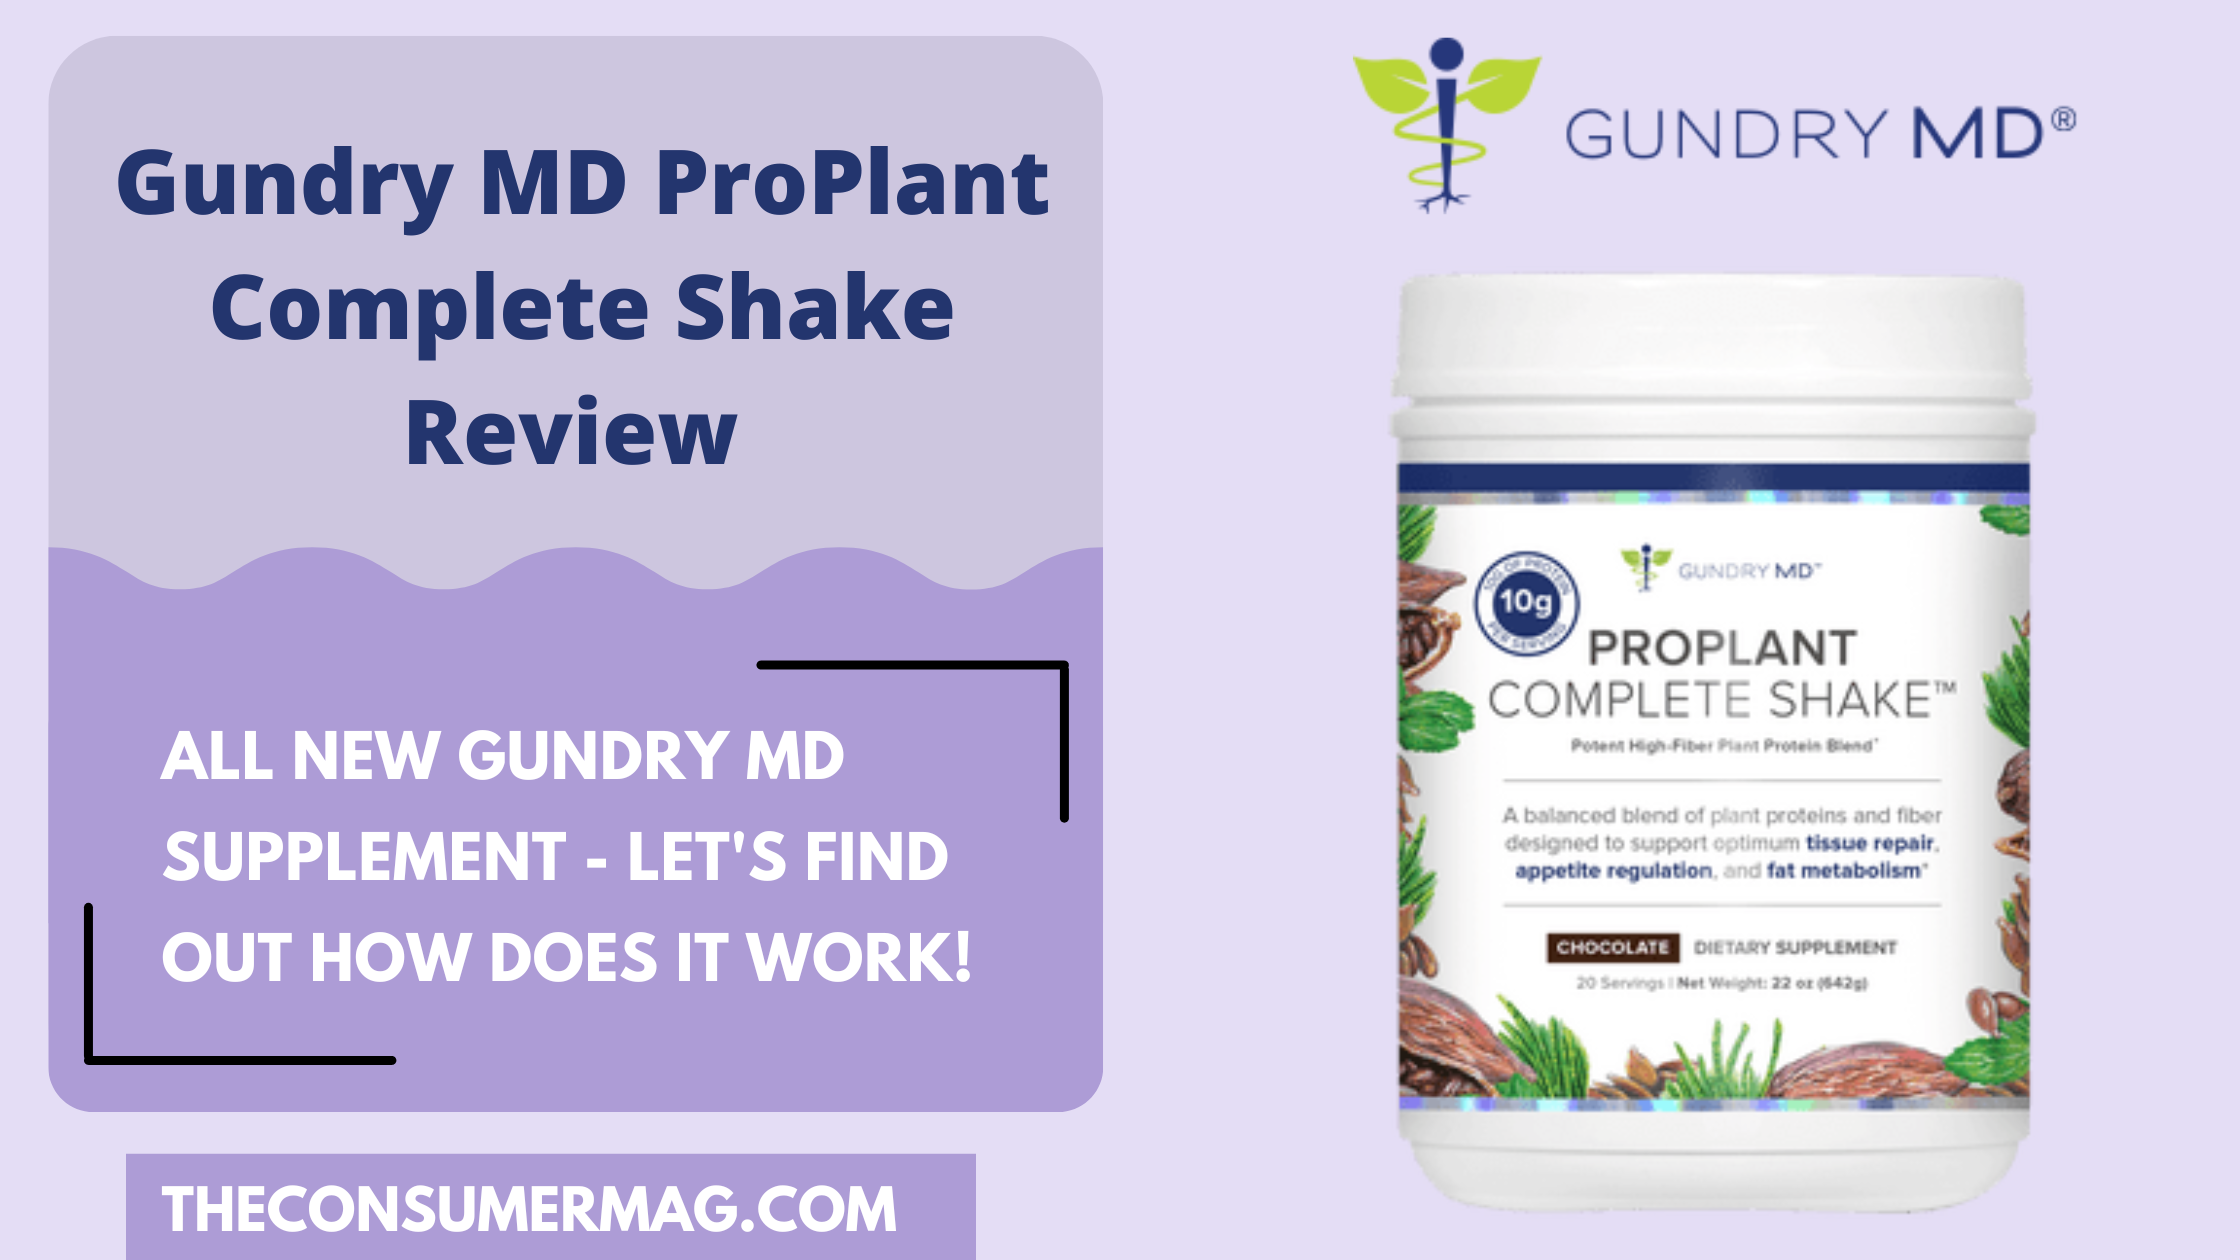 Gundry MD Proplant Complete Shake Review | Read All Proplant Complete Shake Reviews